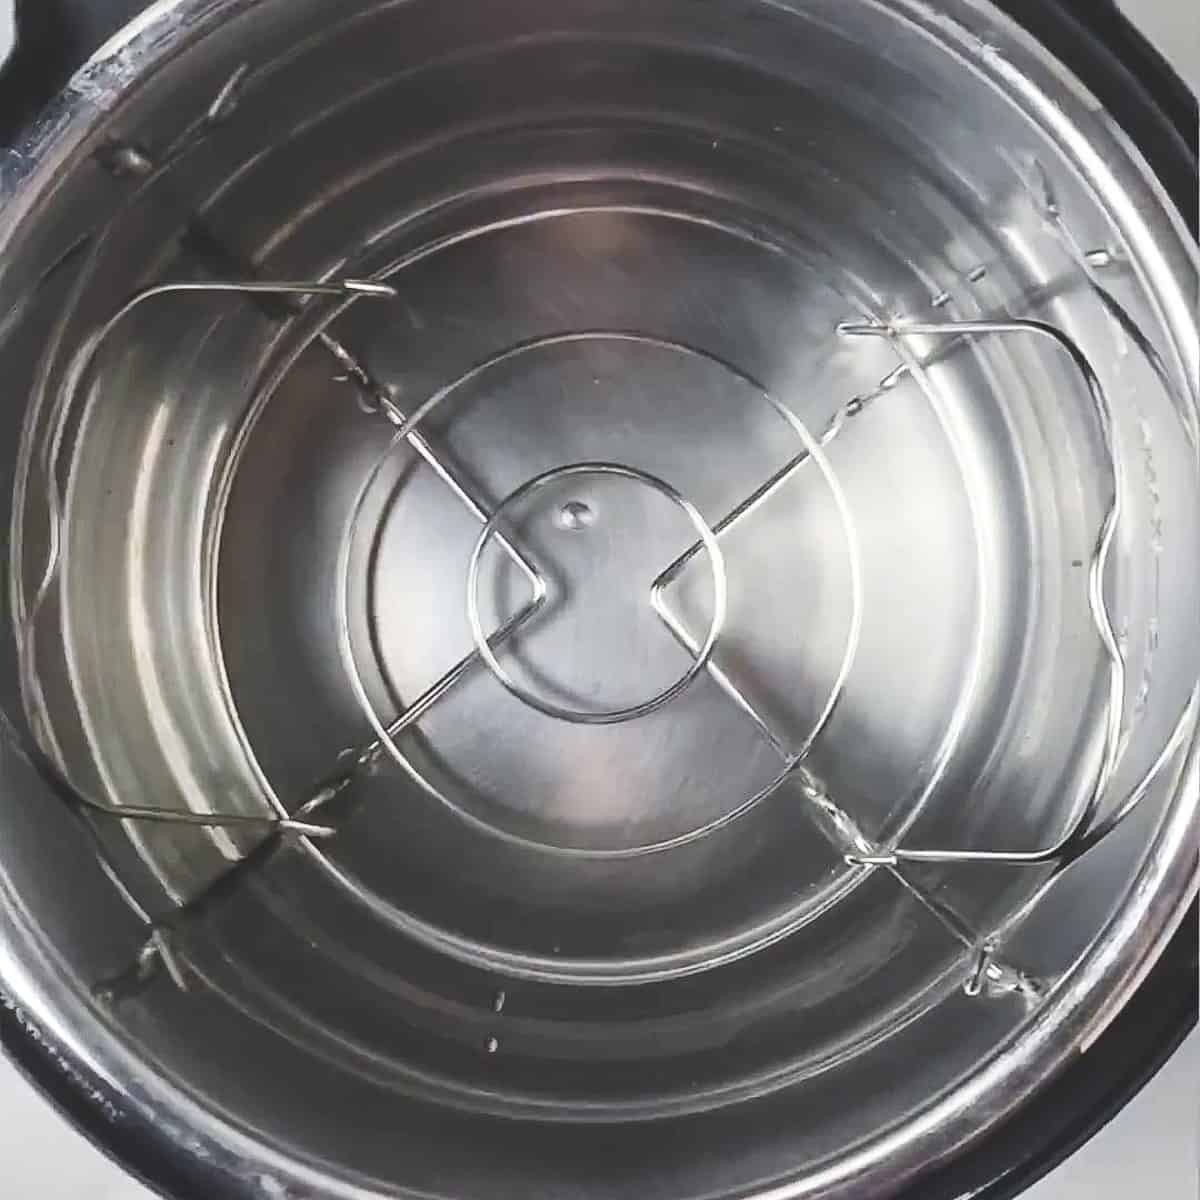 water and trivet in instant pot